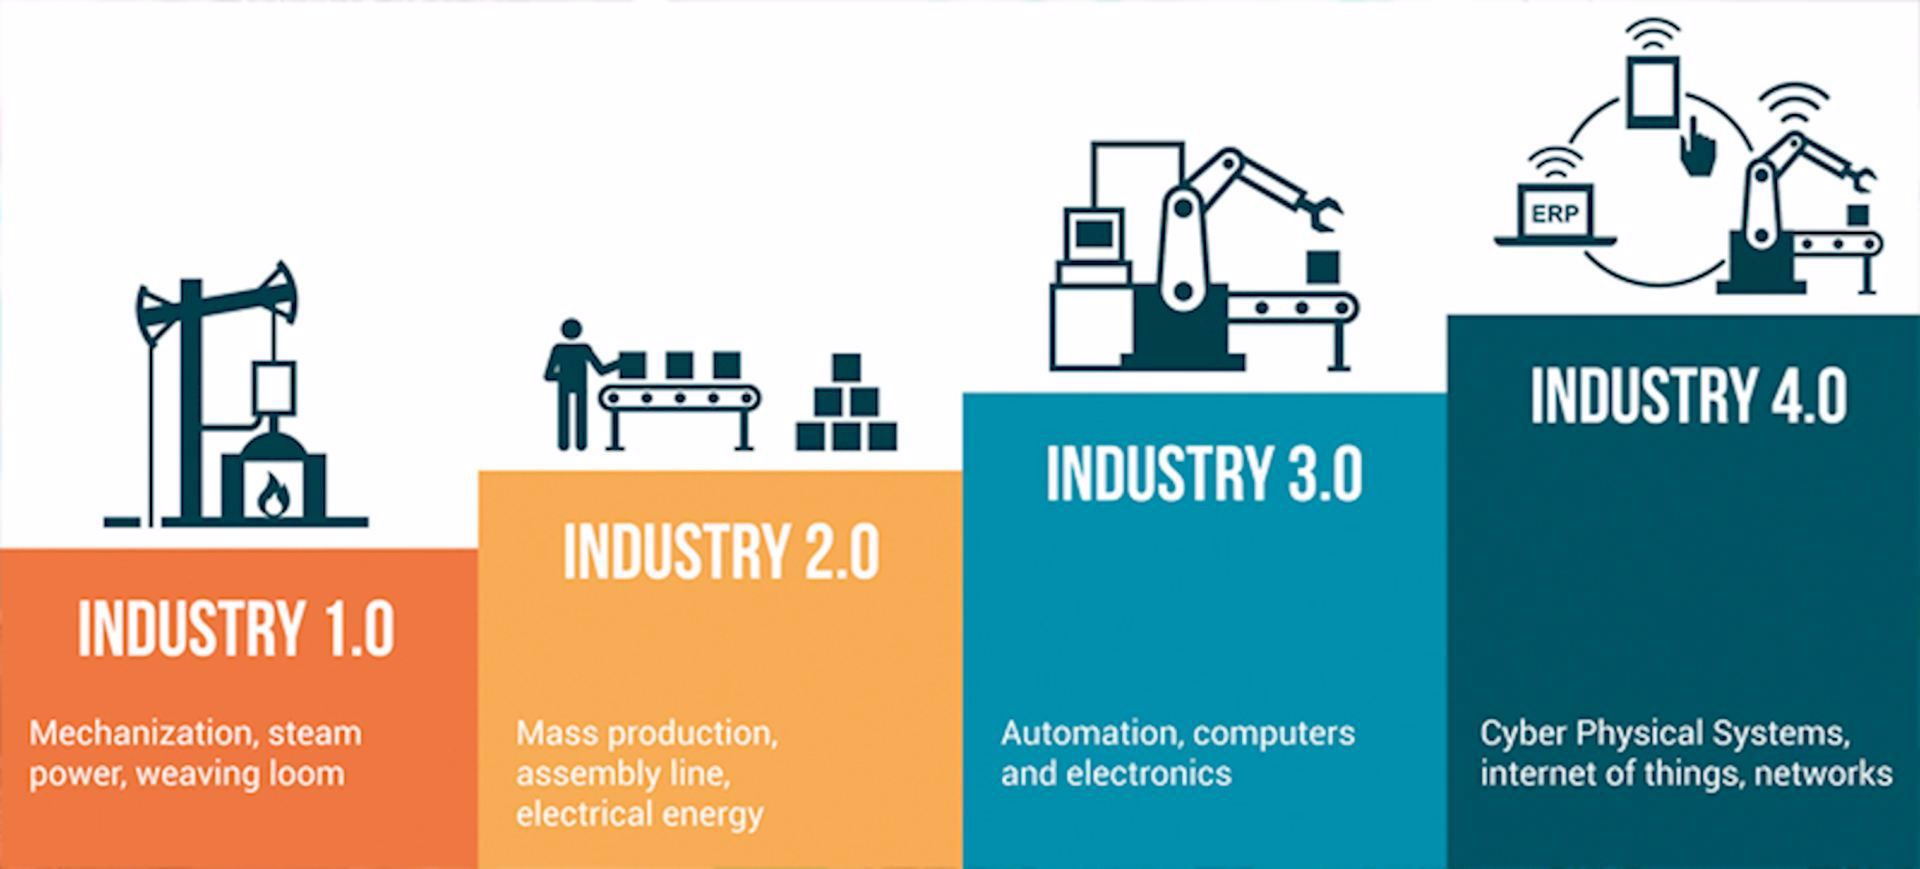 Industry 4.0 - future proof